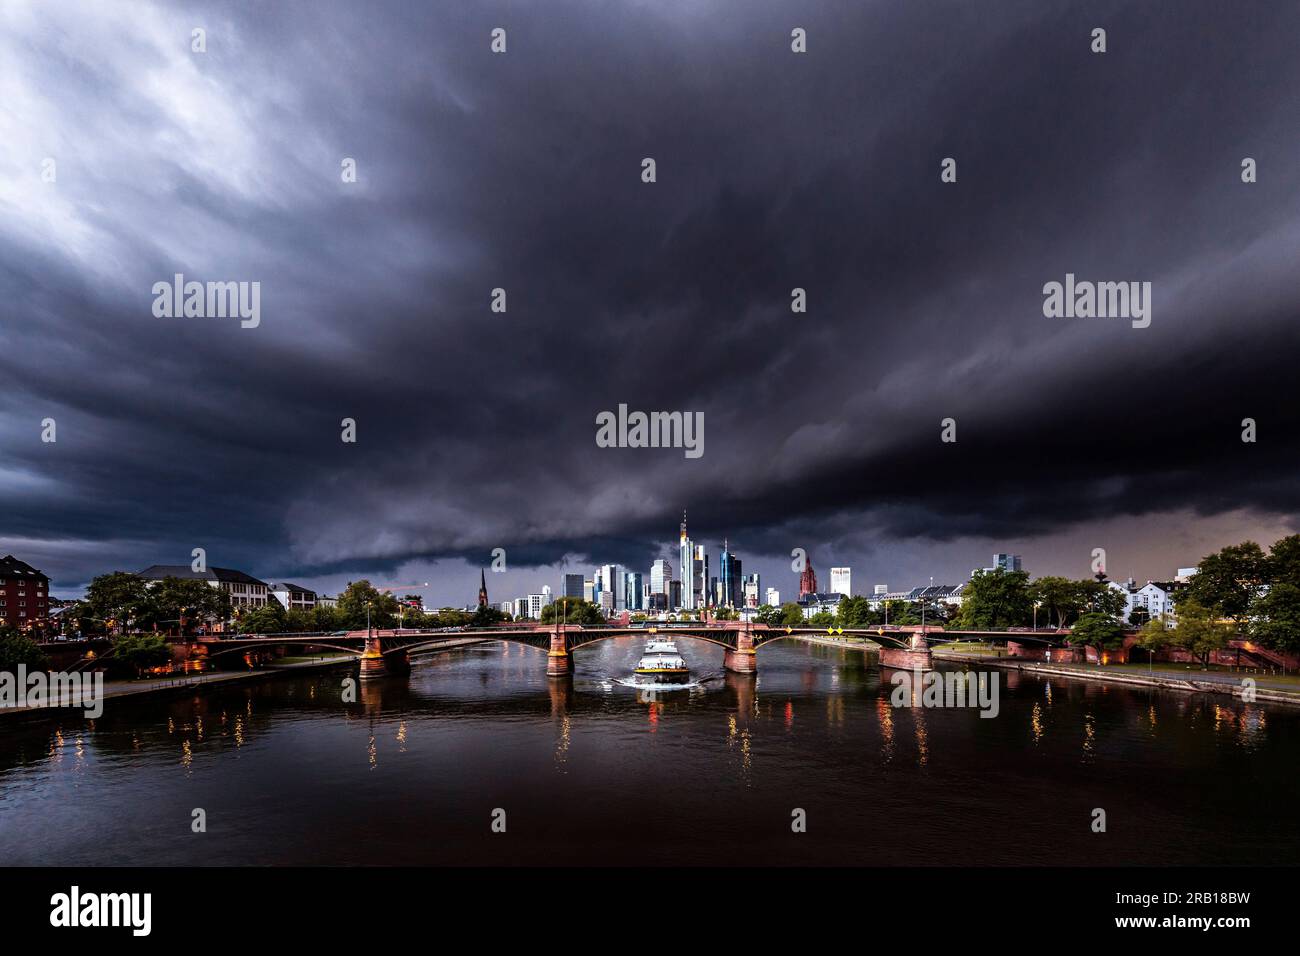 Thunderstorm cell over Frankfurt am Main, taken at the Flösserbrücke on the river Main, the thundercloud is directly above the skyline, Hesse, Germany Stock Photo